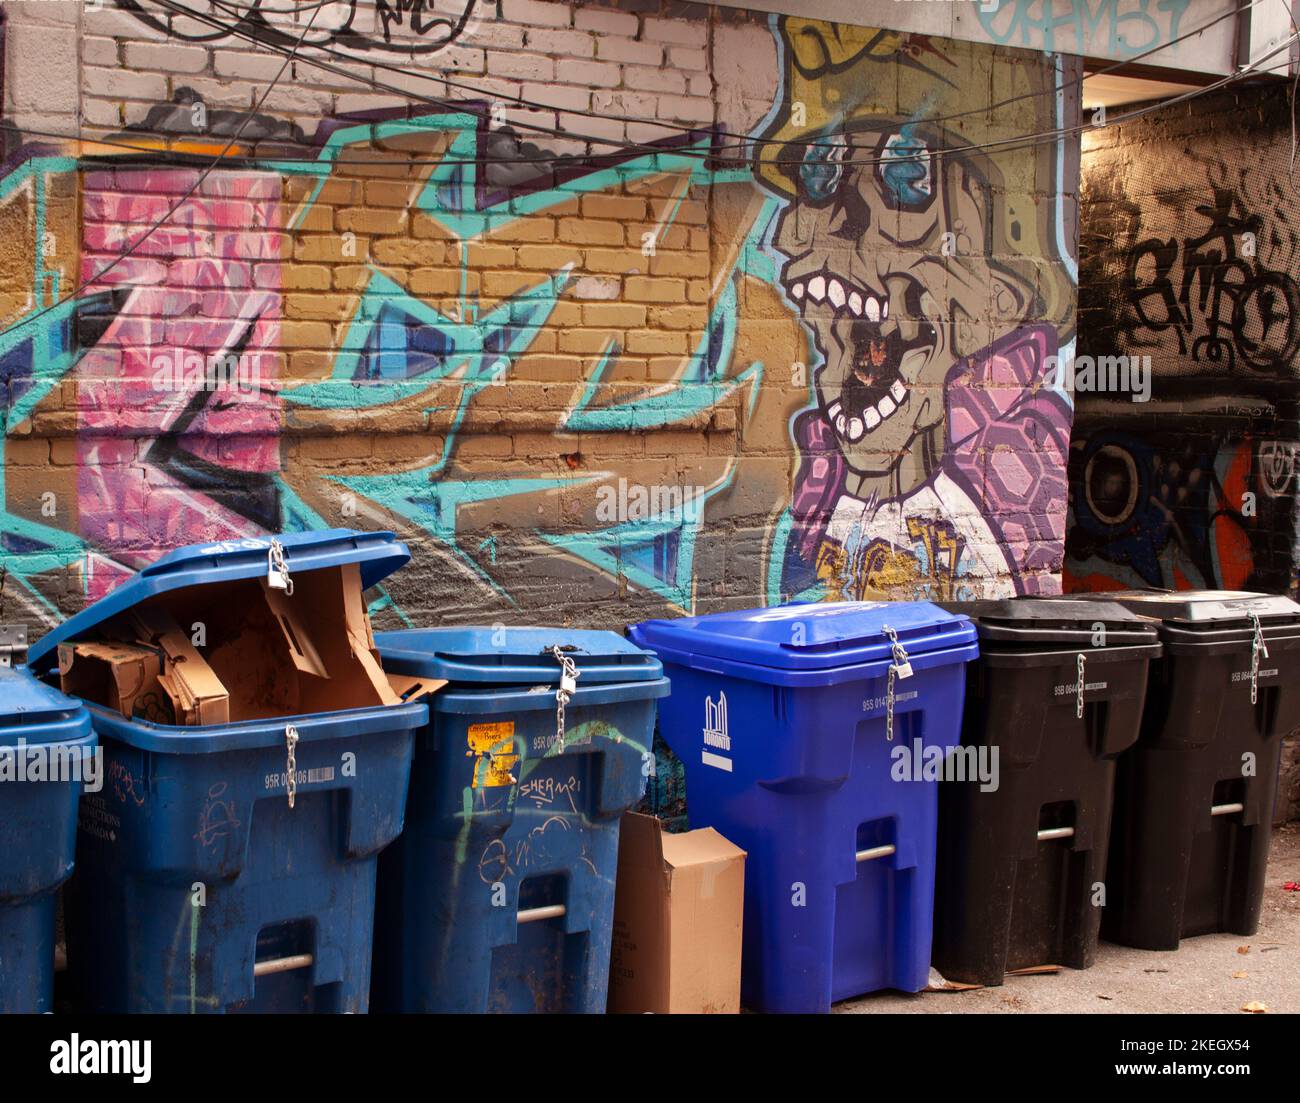 Toronto,Canada - November 12 2022: garbage containers against a wall mural in in downtown Toronto, Stock Photo